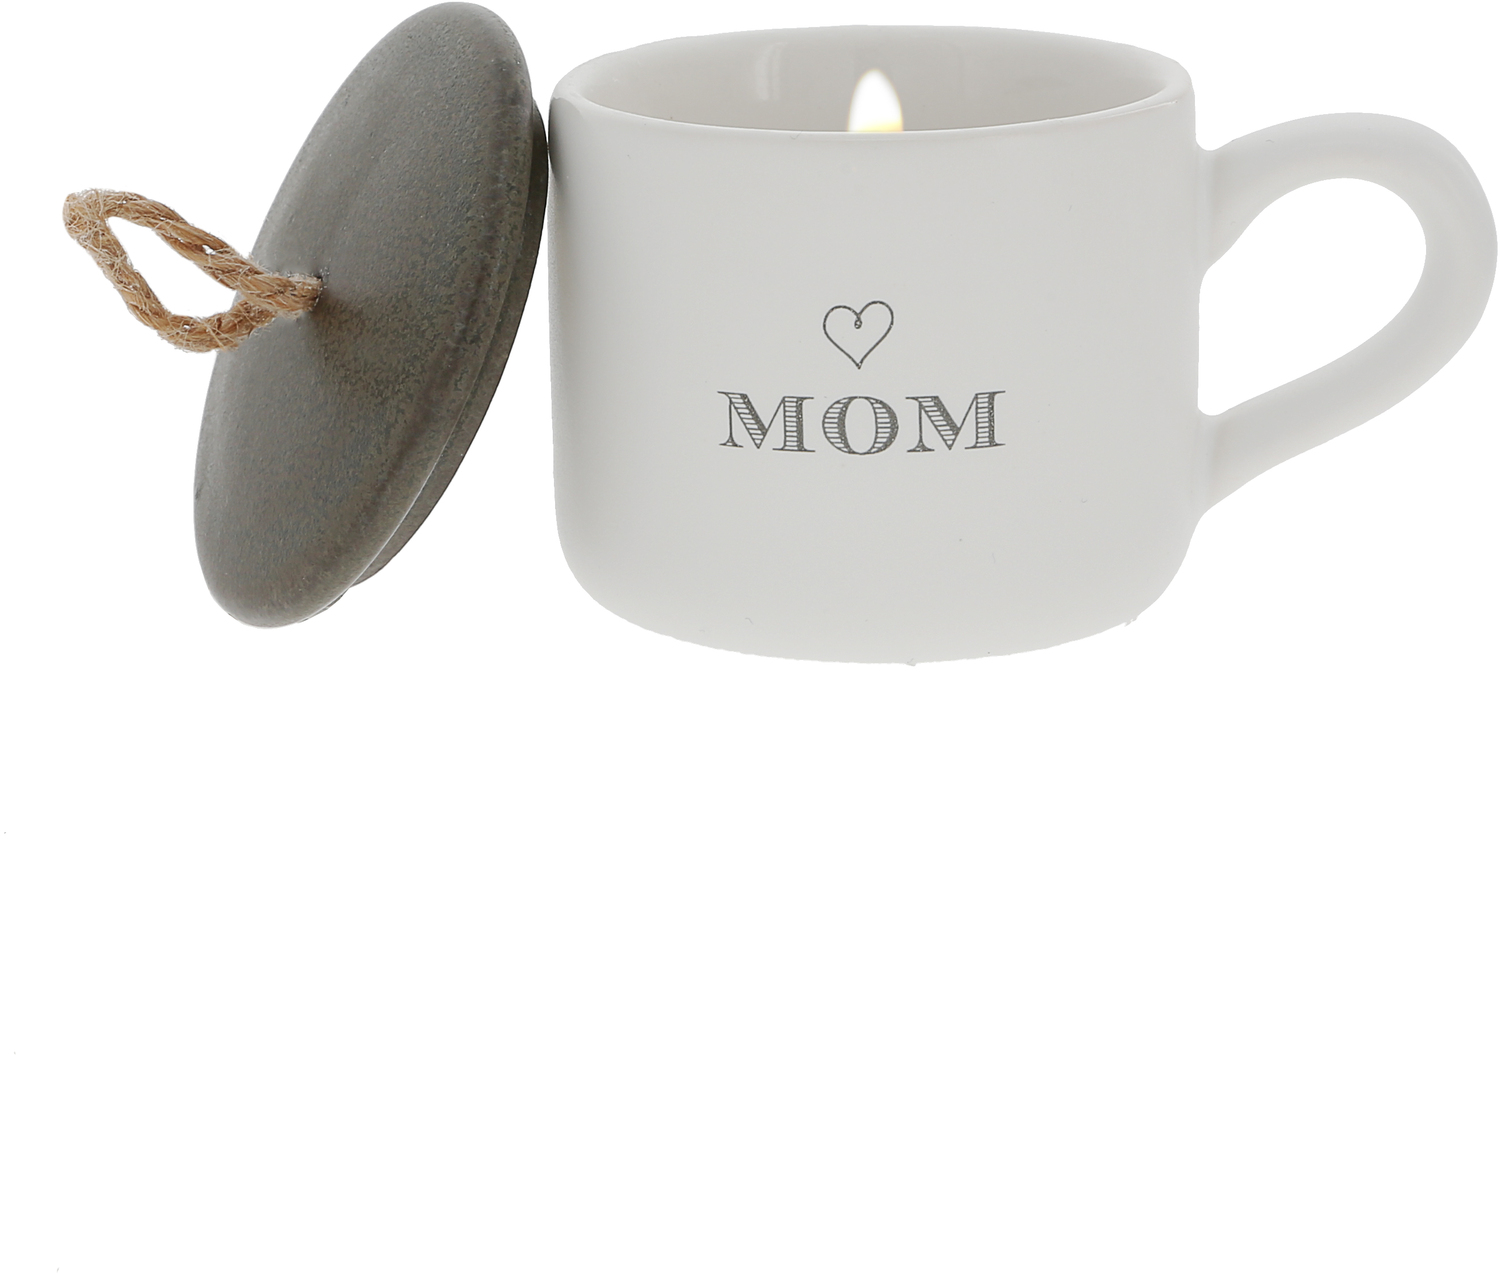 Mom by Filled with Warmth - Mom - 2 oz Mini Mug 100% Soy Wax Candle
Scent: Tranquility